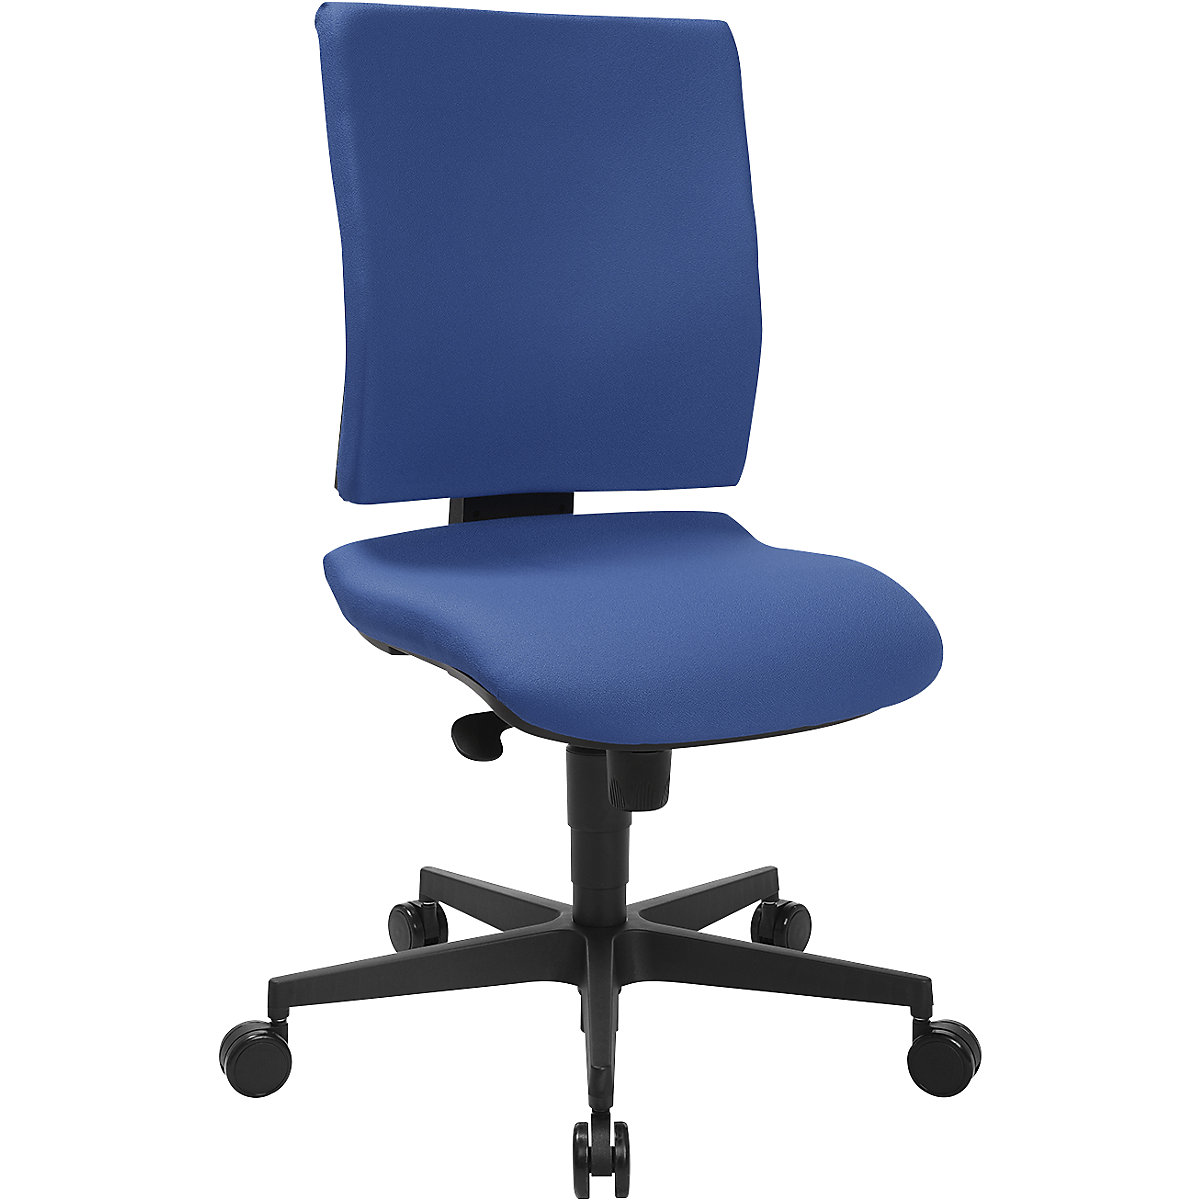 SYNCRO CLEAN office swivel chair - Topstar